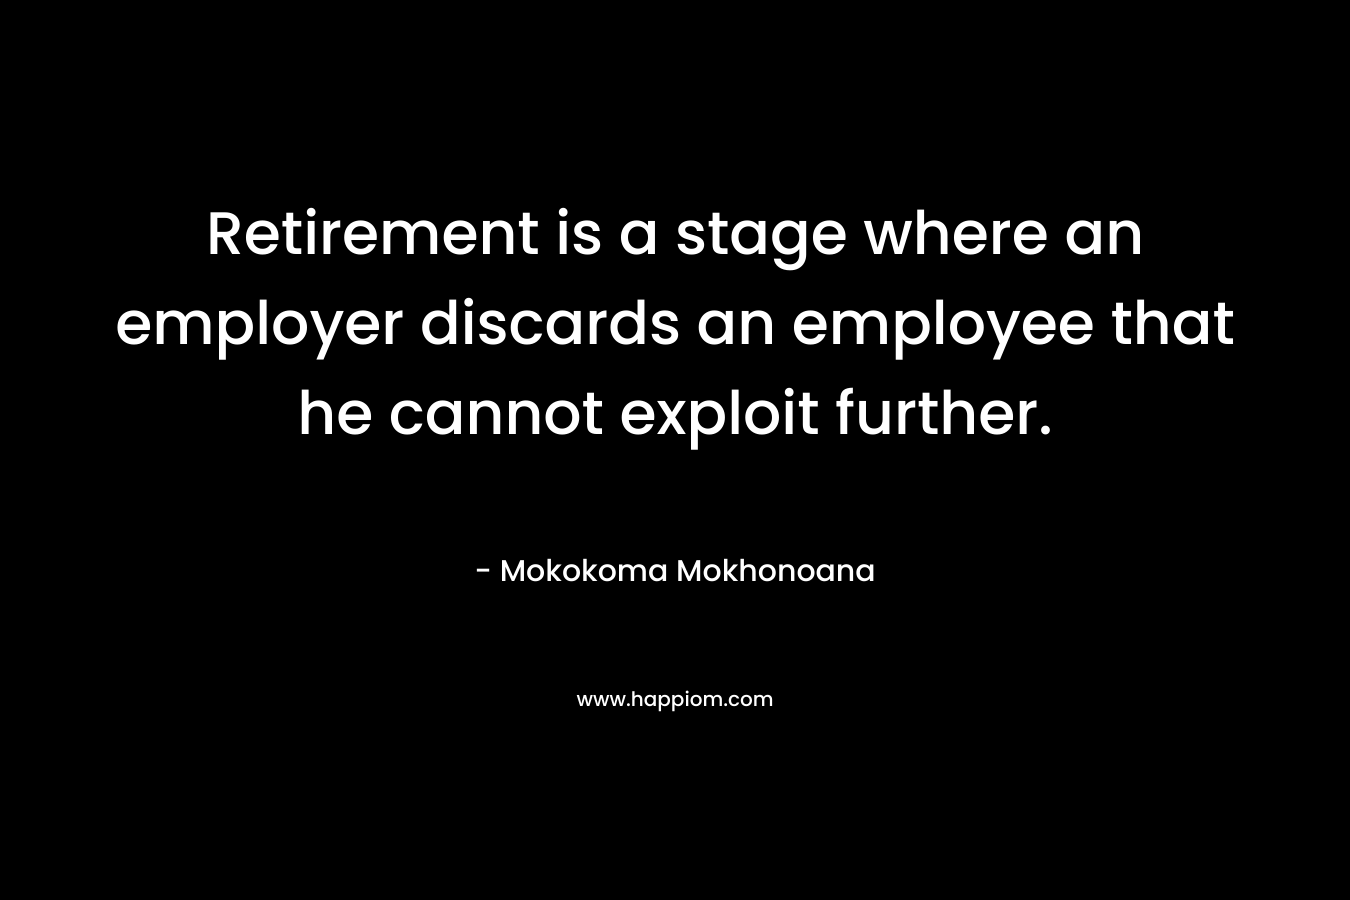 Retirement is a stage where an employer discards an employee that he cannot exploit further. – Mokokoma Mokhonoana